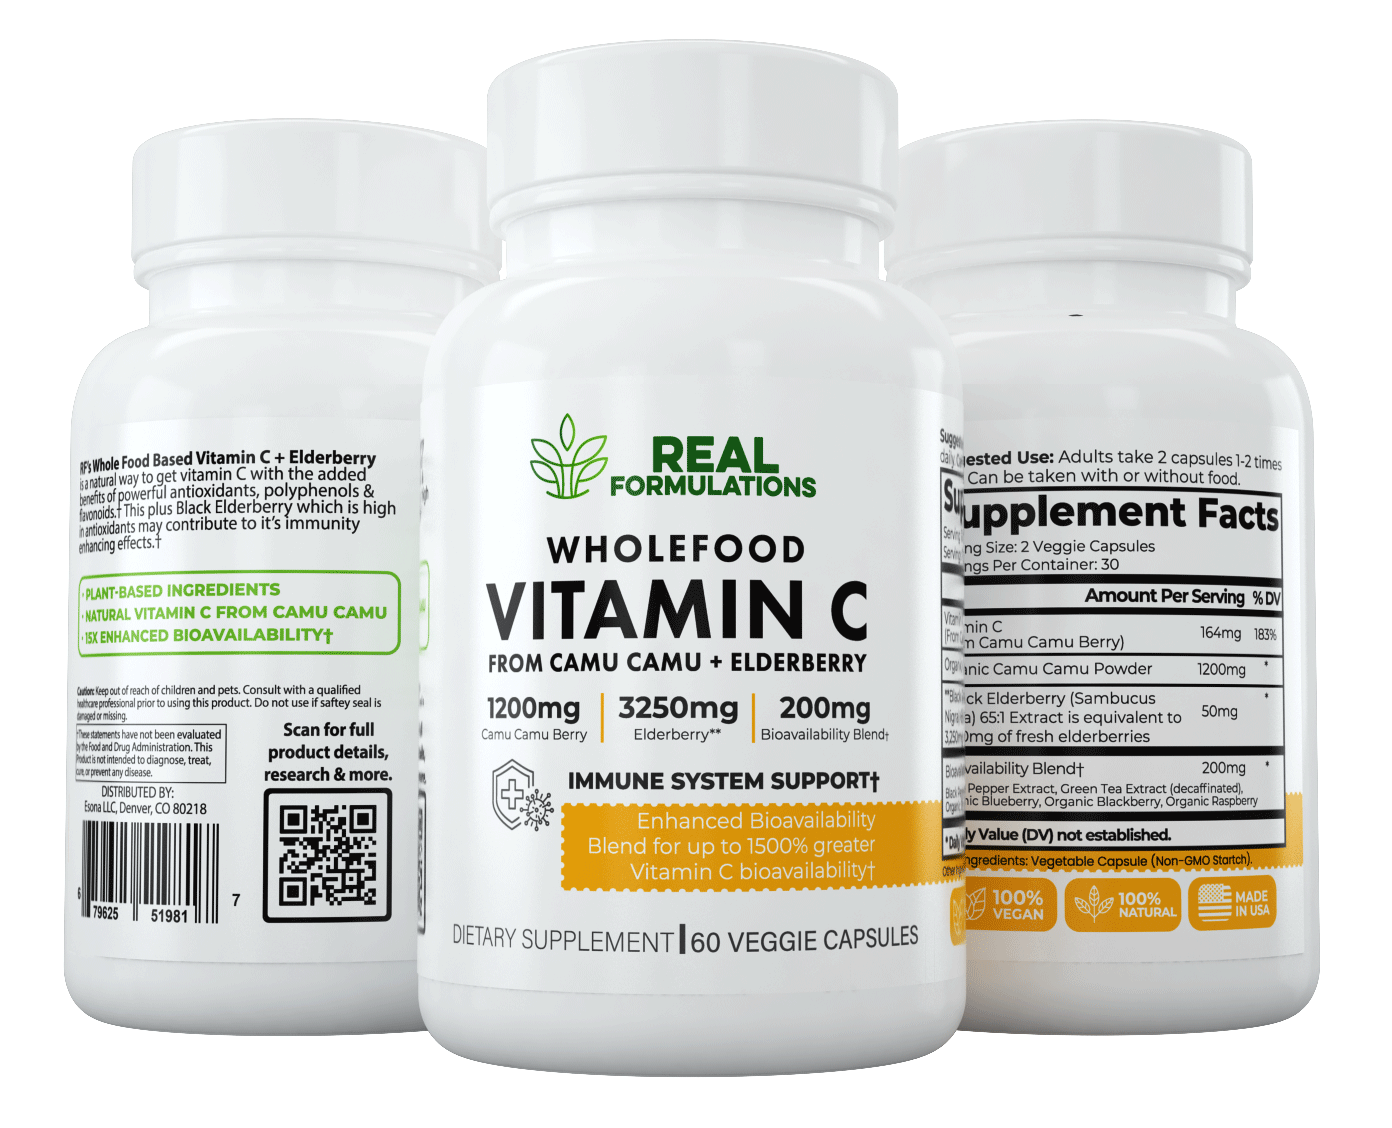 Real Formulations Wholefood Vitamin C. A blend of Camu Camu Berry, Black Elderberry Extract, Black Pepper Extract, Green Tea Extract (Caffeine-free), Organic blueberry, Organic Blackberry & Organic Raspberry.